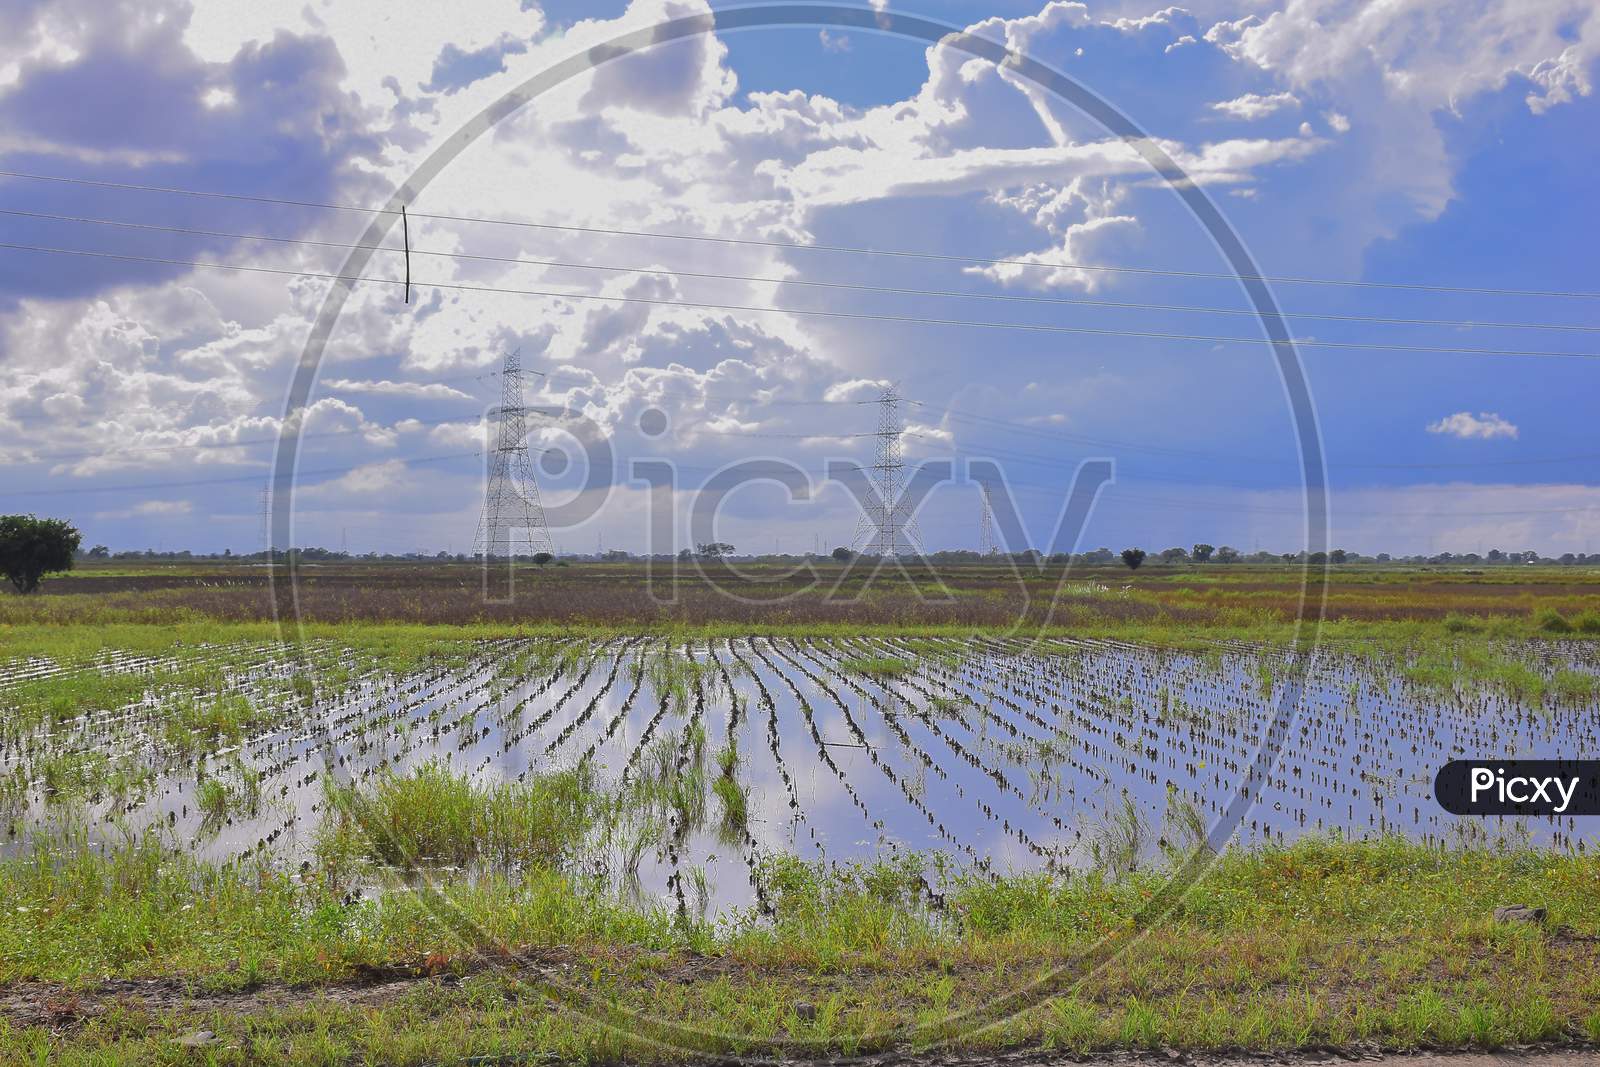 Due To Excessive Rain. The Fields Are Flooded And Soybean Crop Is Being Destroyed, Indian Fields And Clouds.